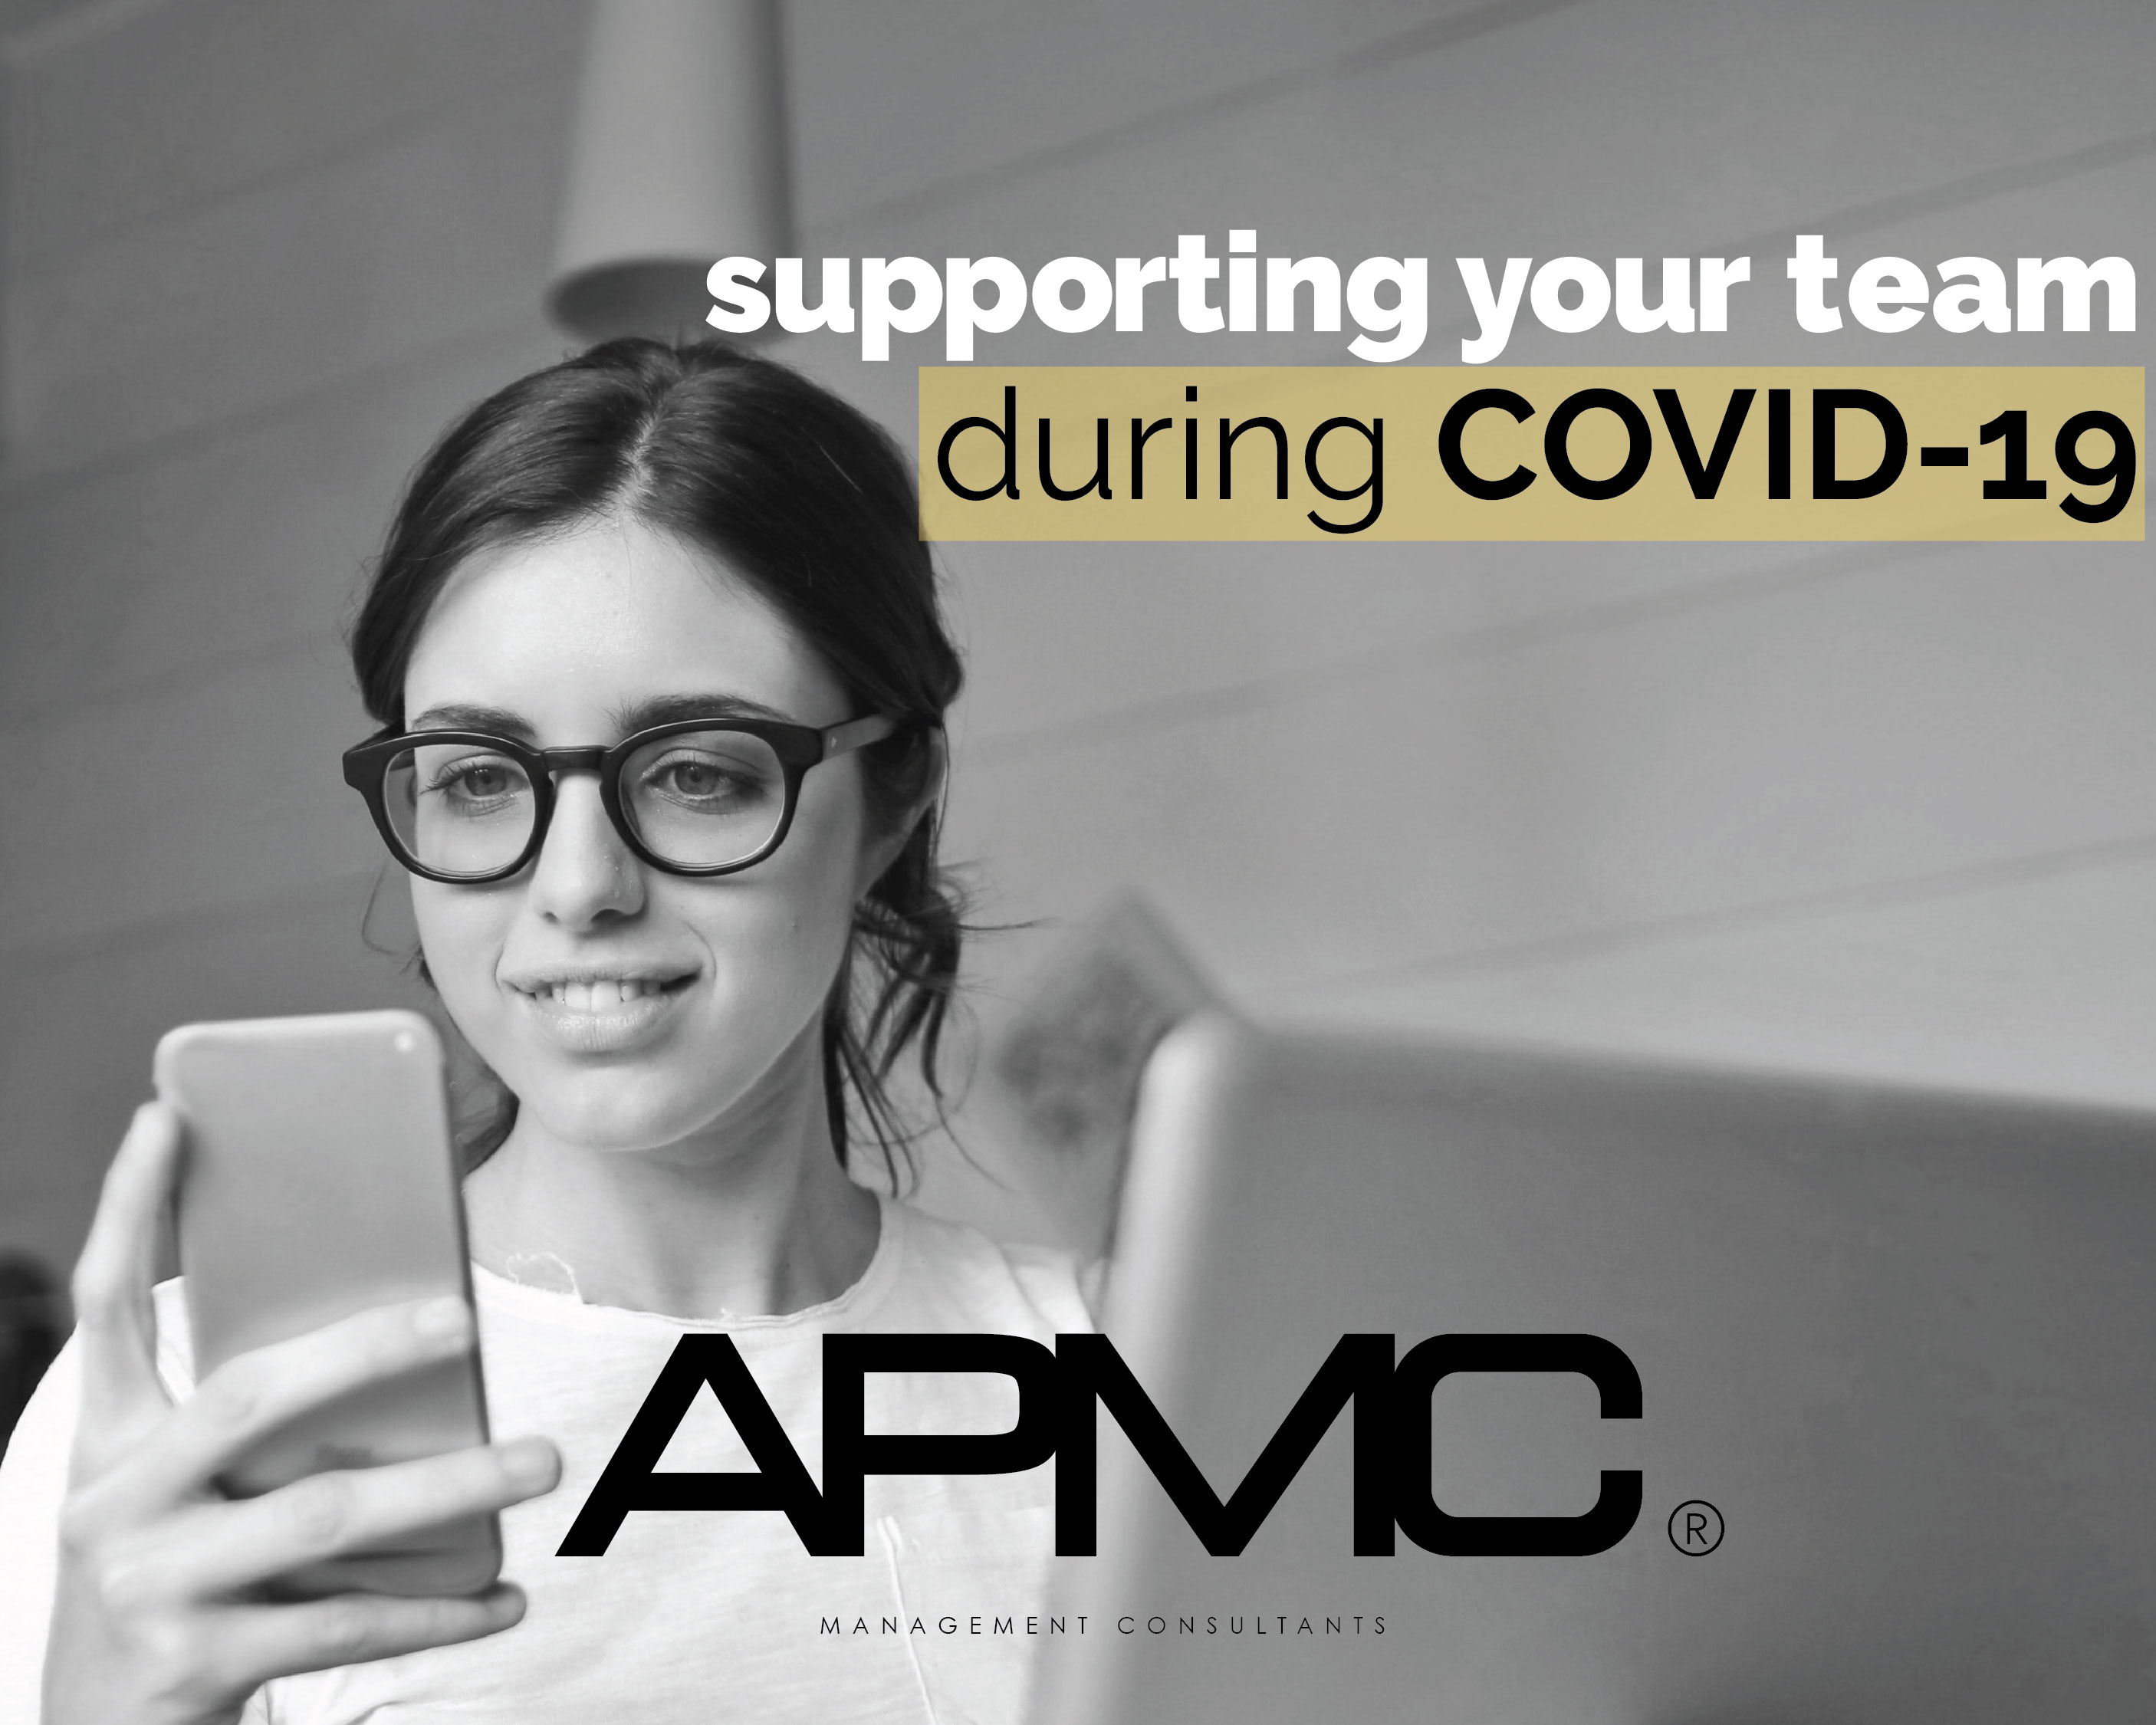 HOW TO SUPPORT YOUR TEAM DURING COVID-19